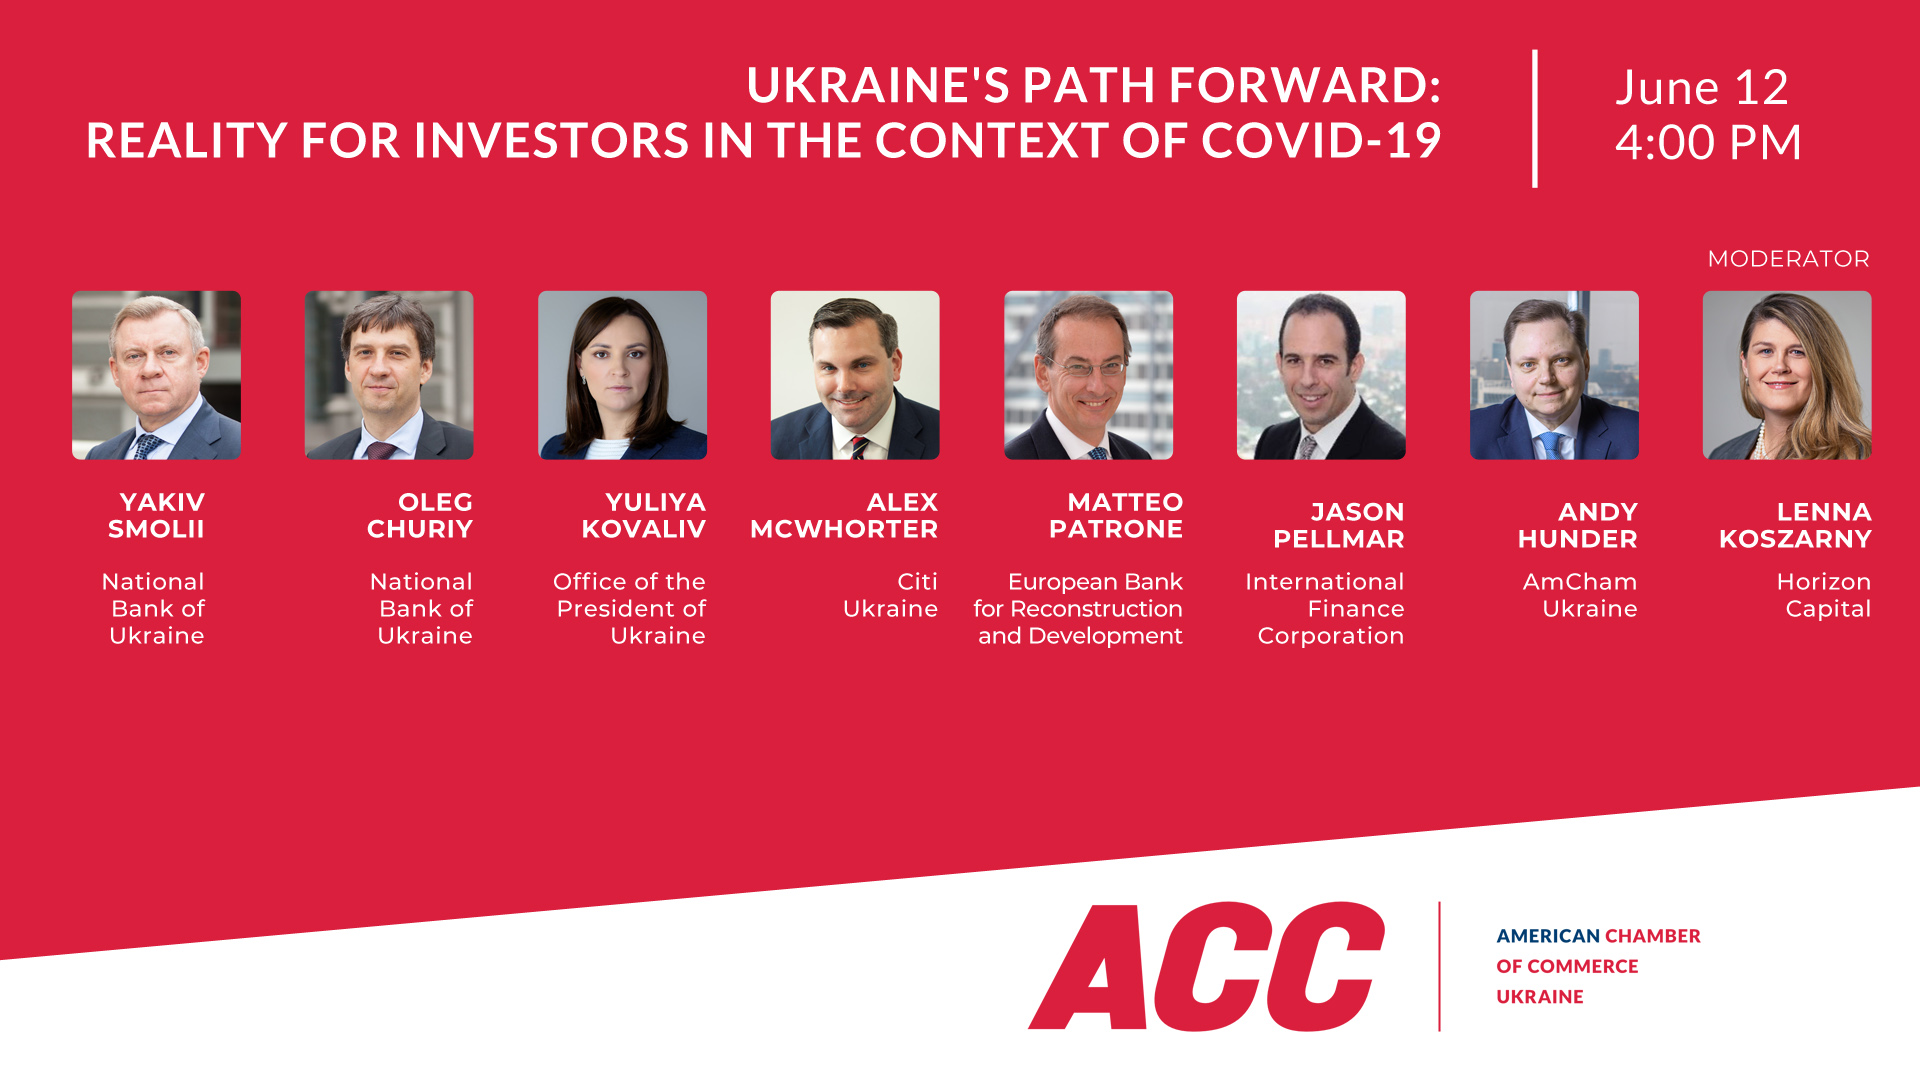 Online Panel Discussion “Ukraine's Path Forward: Reality for Investors in the Context of COVID-19”